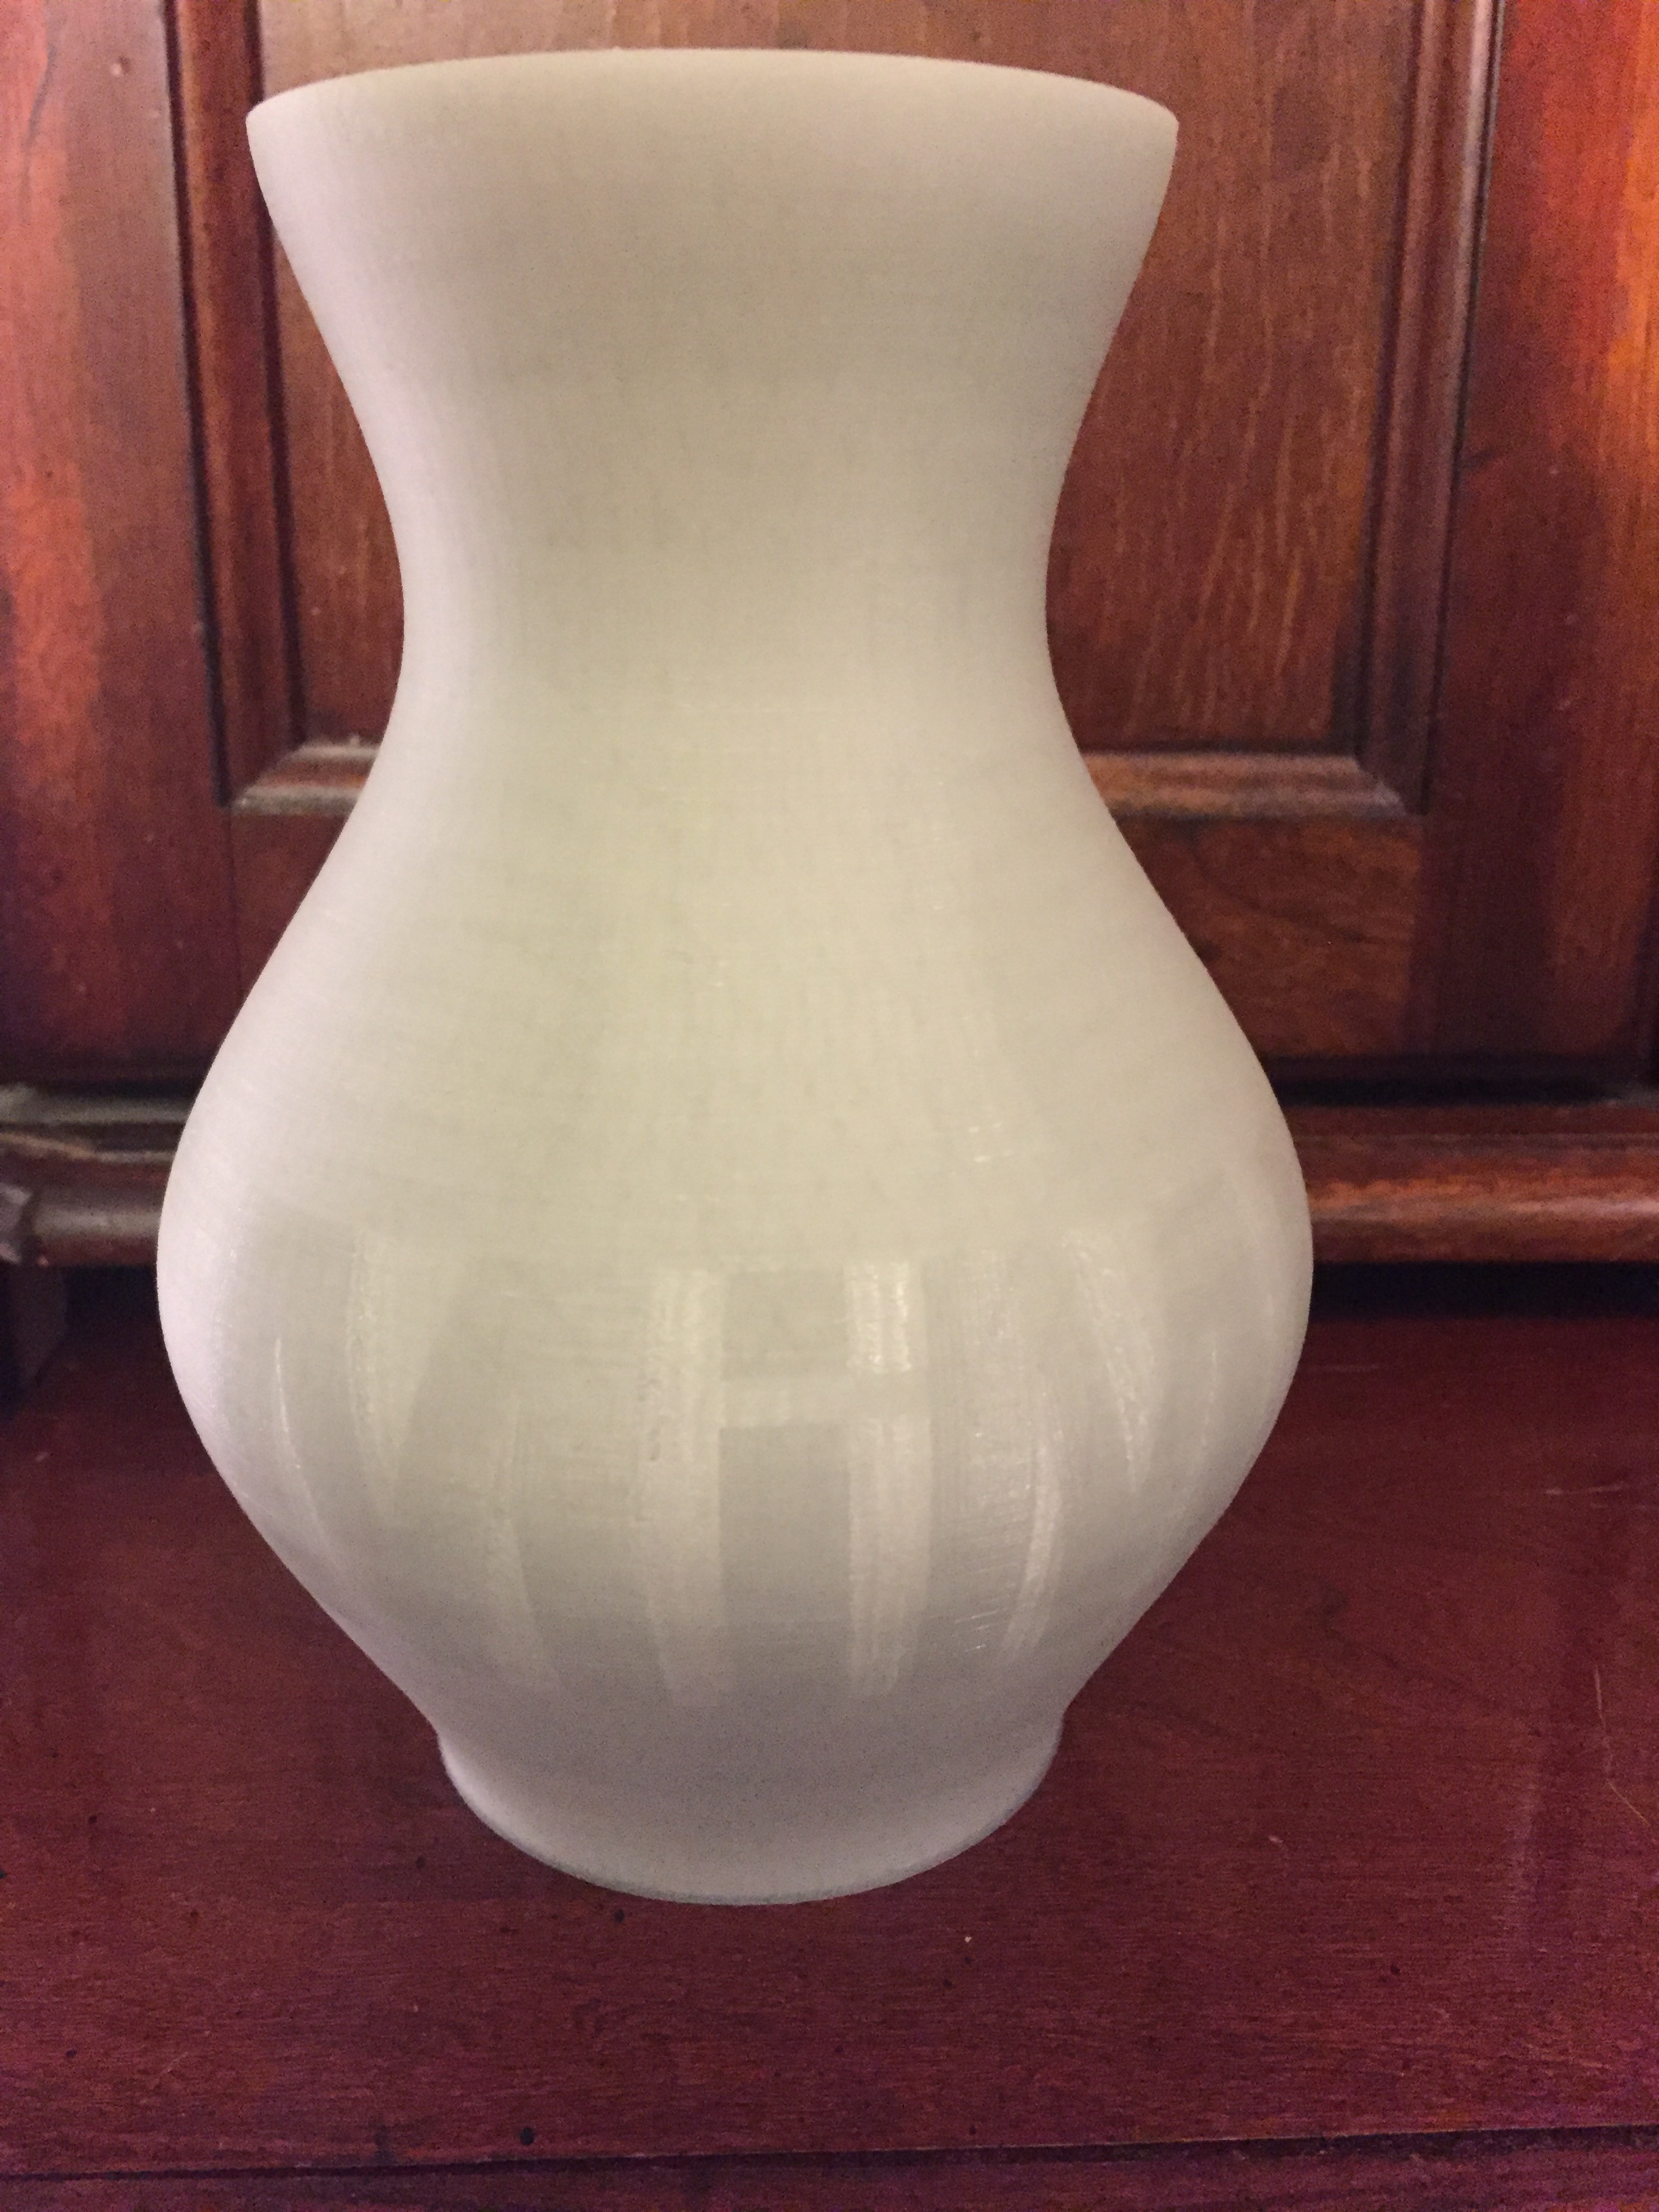 23 Recommended 3d Printed Vase 2024 free download 3d printed vase of smooth vase by kouruu thingiverse pertaining to by kouruu may 14 2017 view original